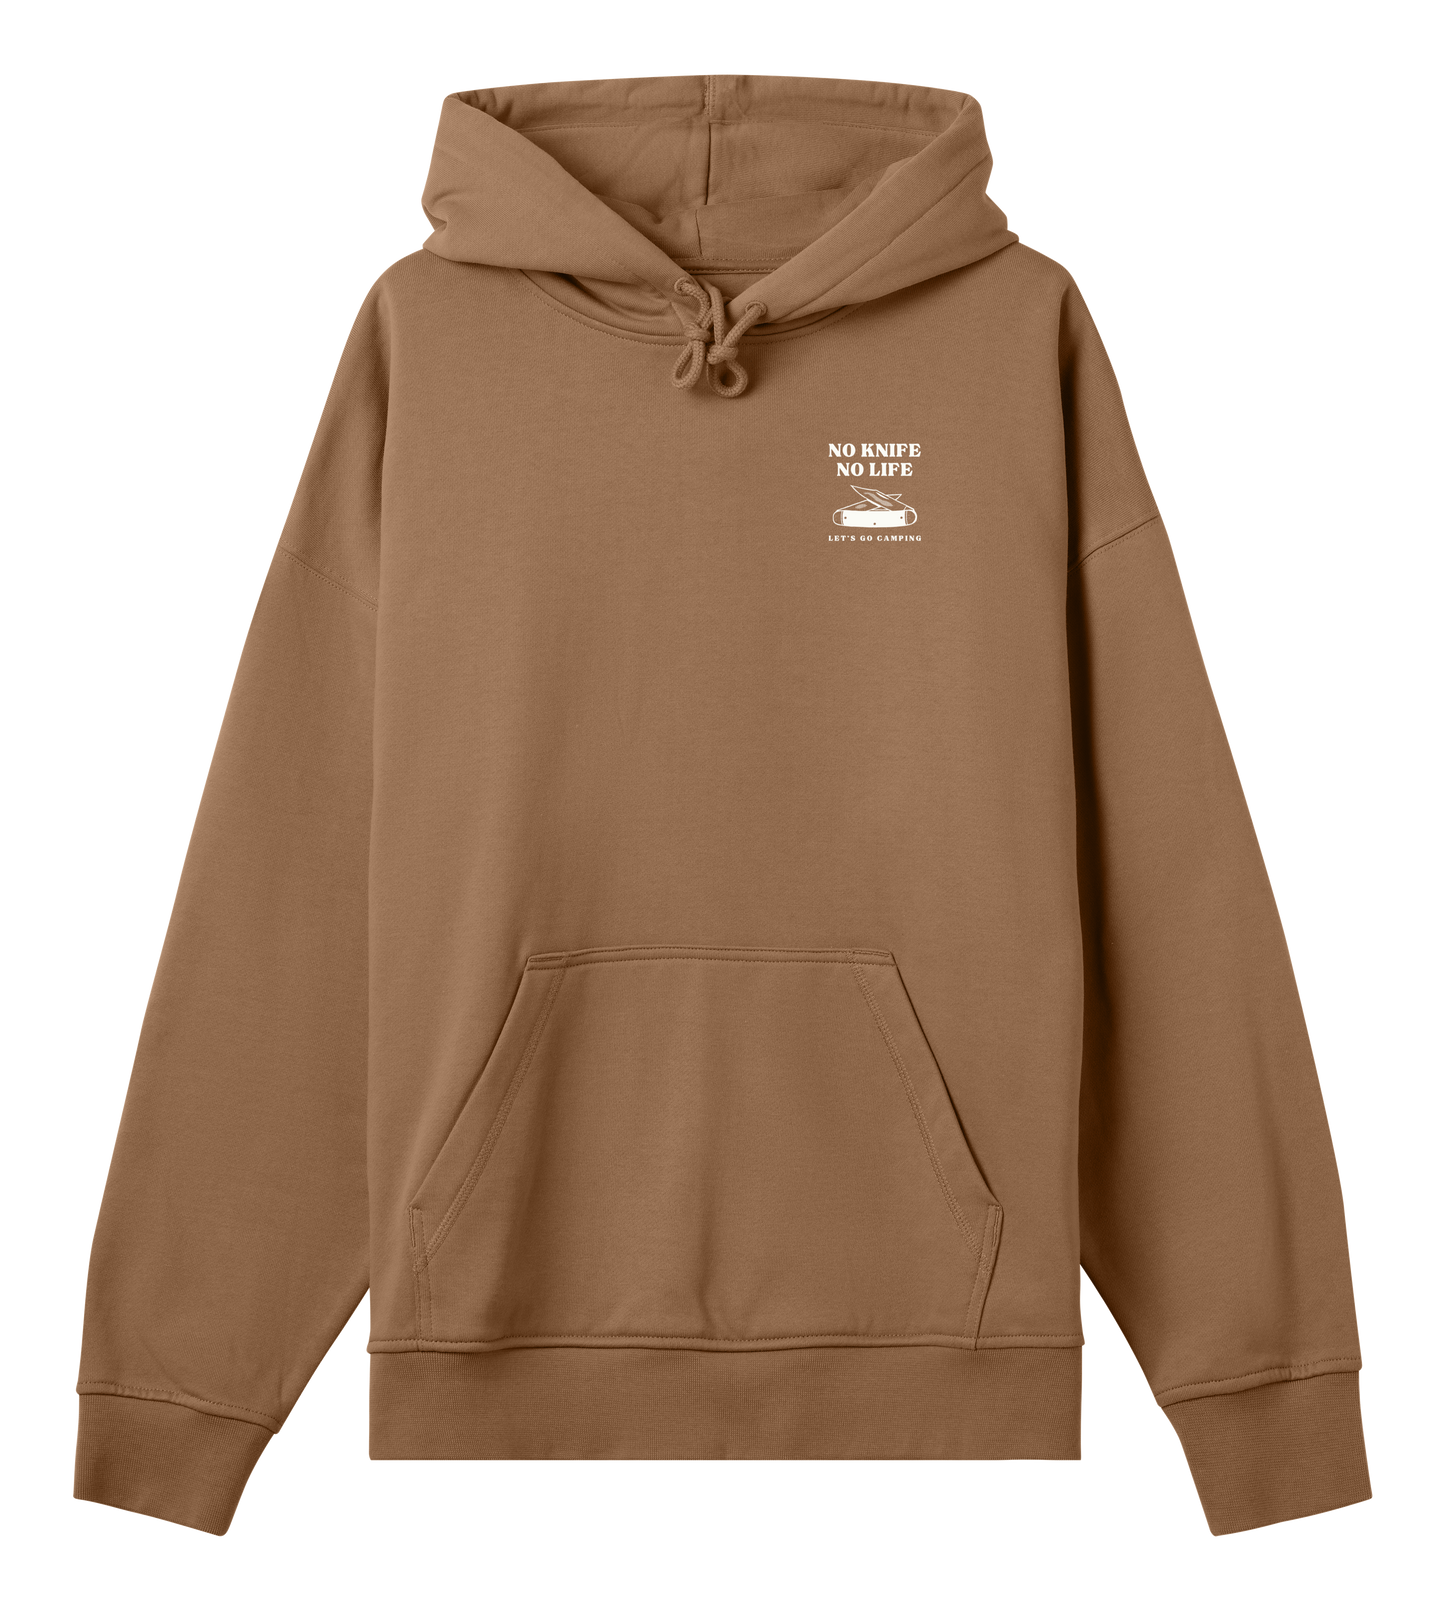 'No Knife No life' Men's Boxy Hoodie - Toffee Brown